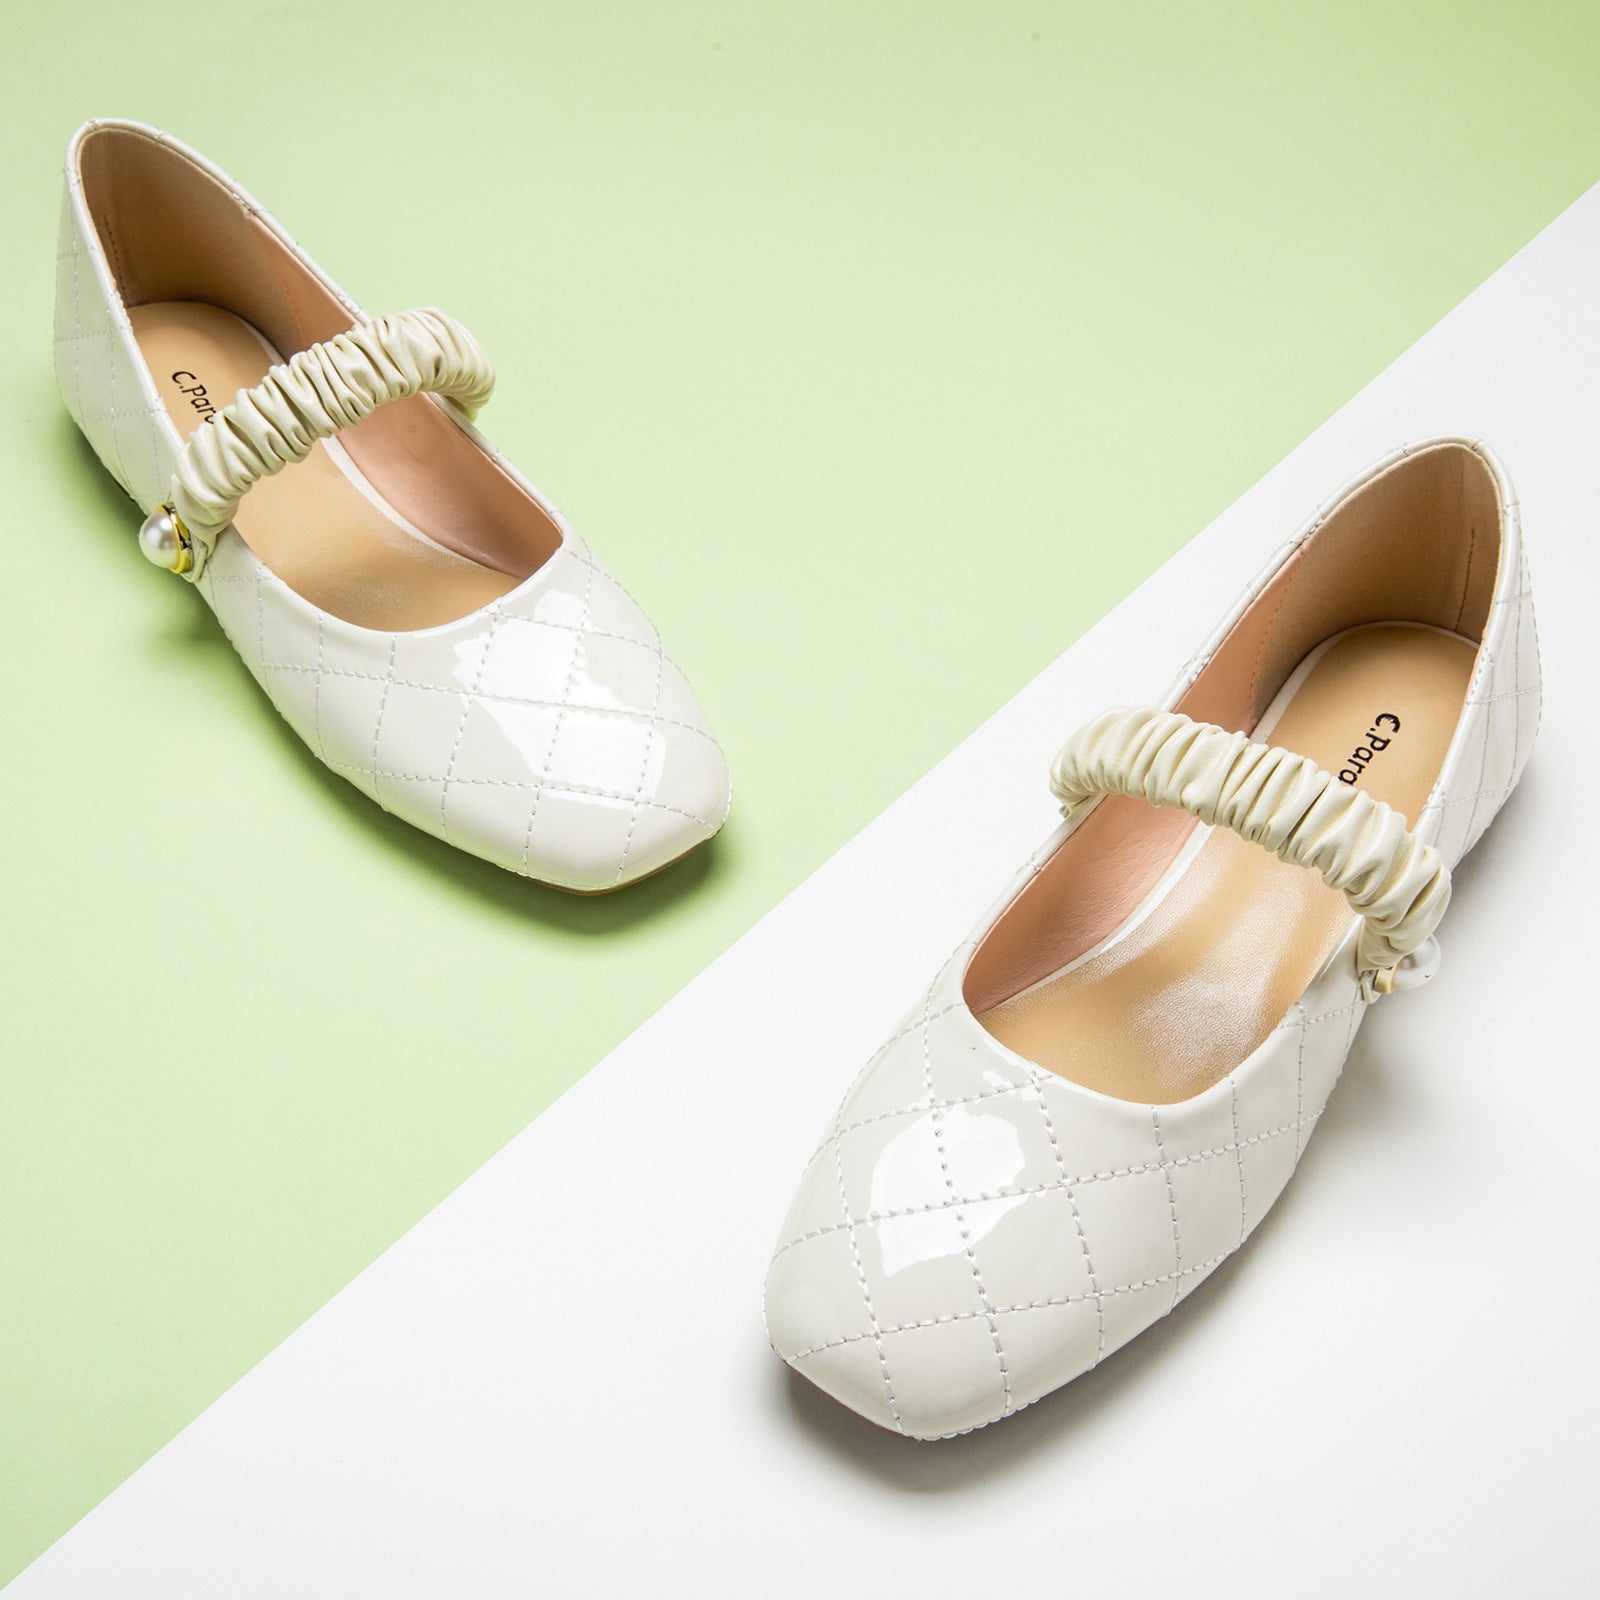 Mary Jane shoes in White with crossed stripes, featuring classic details for a polished and sophisticated style